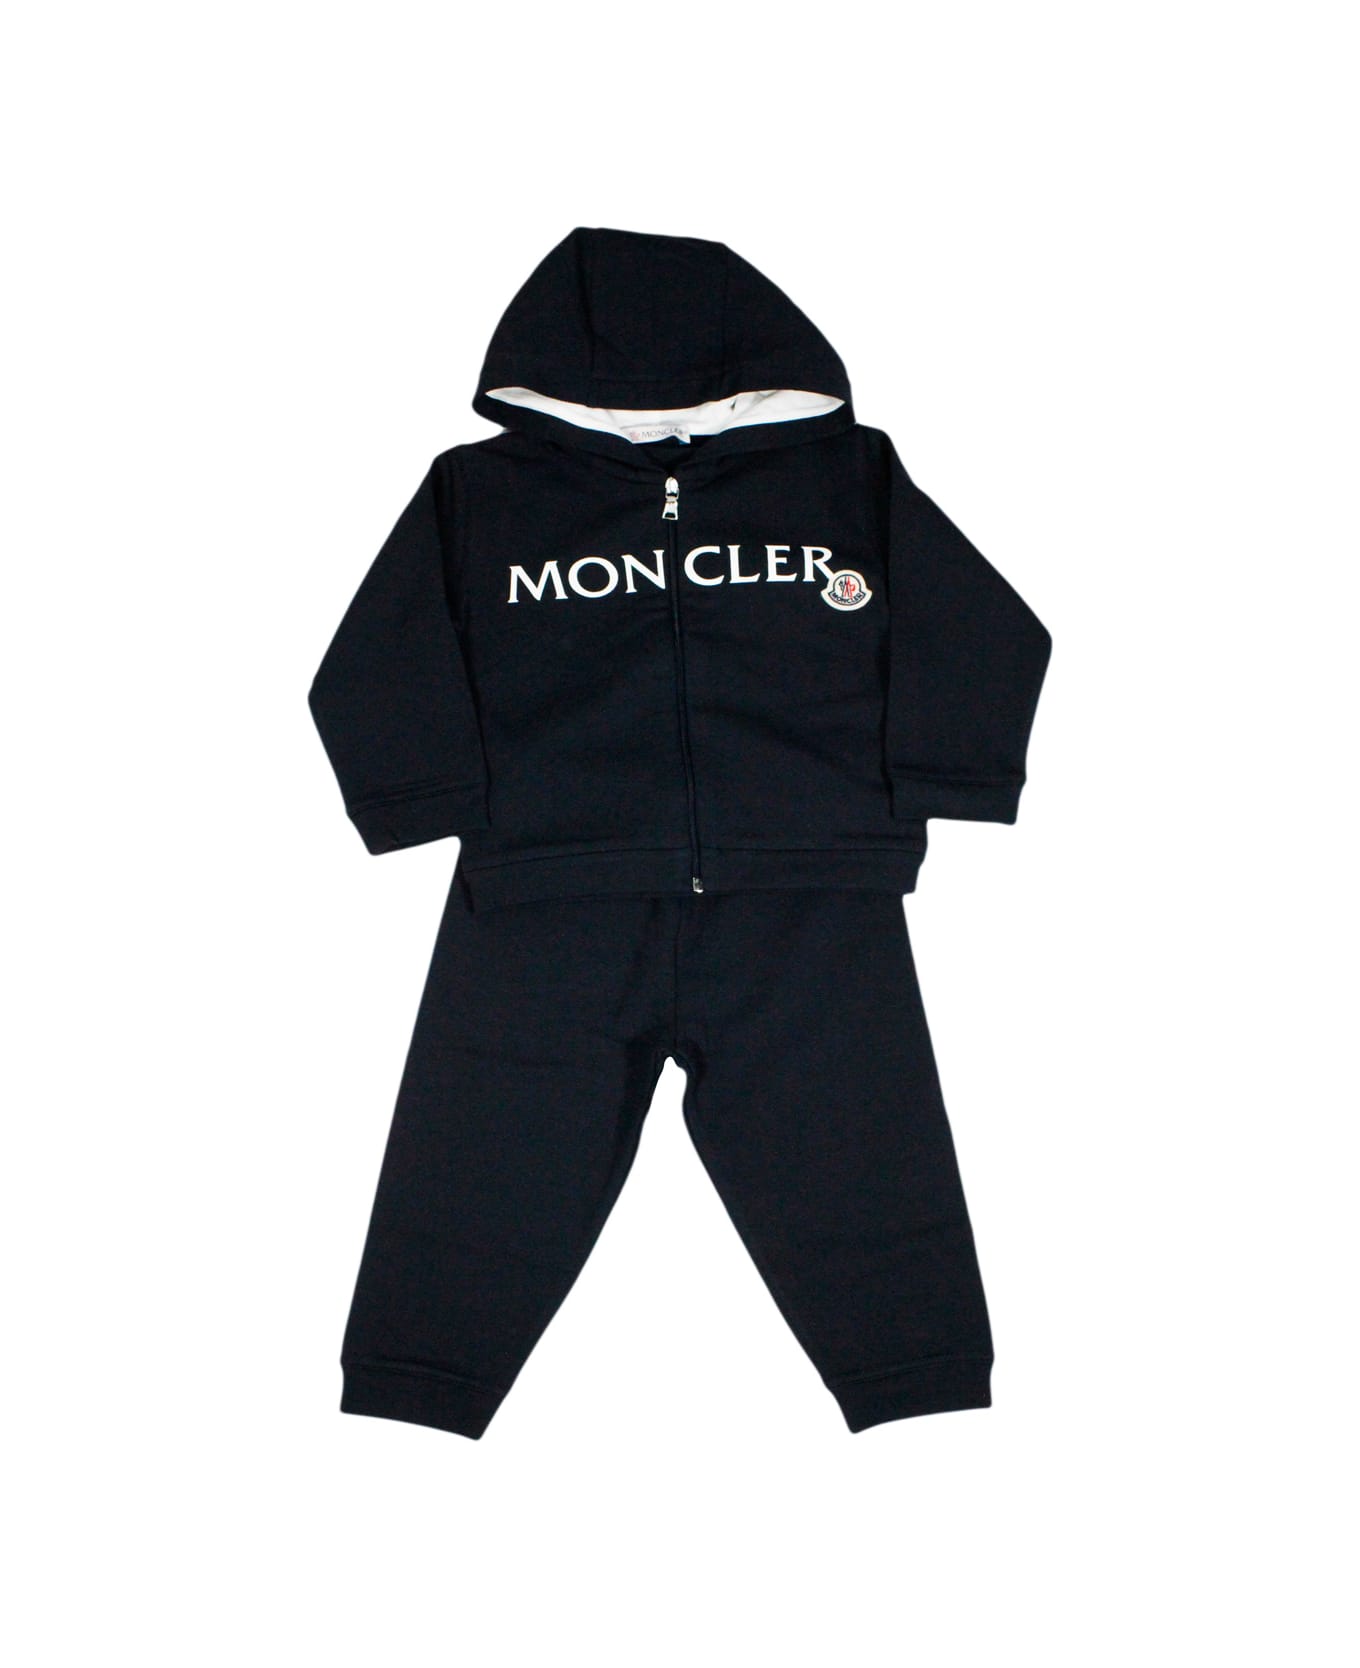 Moncler Complete With Zip-up Sweatshirt With Long-sleeved Hood In Fine Cotton And Trousers With Elastic Waist. Writing And Logo On The Chest - Blu ボディスーツ＆セットアップ